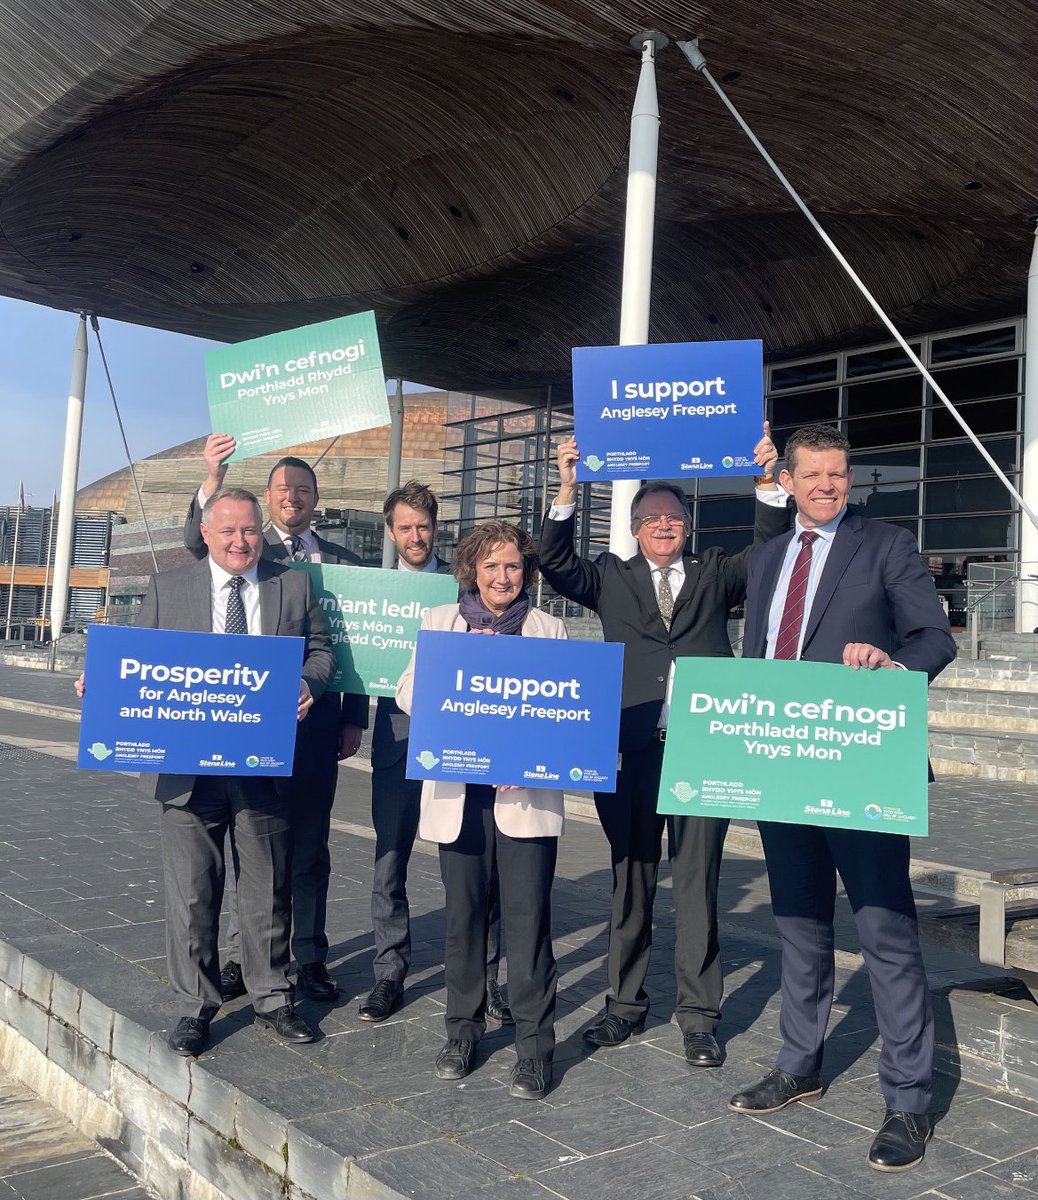 A Freeport in #Anglesey would have huge benefits with jobs, investment and trade brought to #NorthWales. Great to join my fellow #NorthWales Senedd colleagues and show our support for the Anglesey Freeport bid ahead of today's Senedd debate.